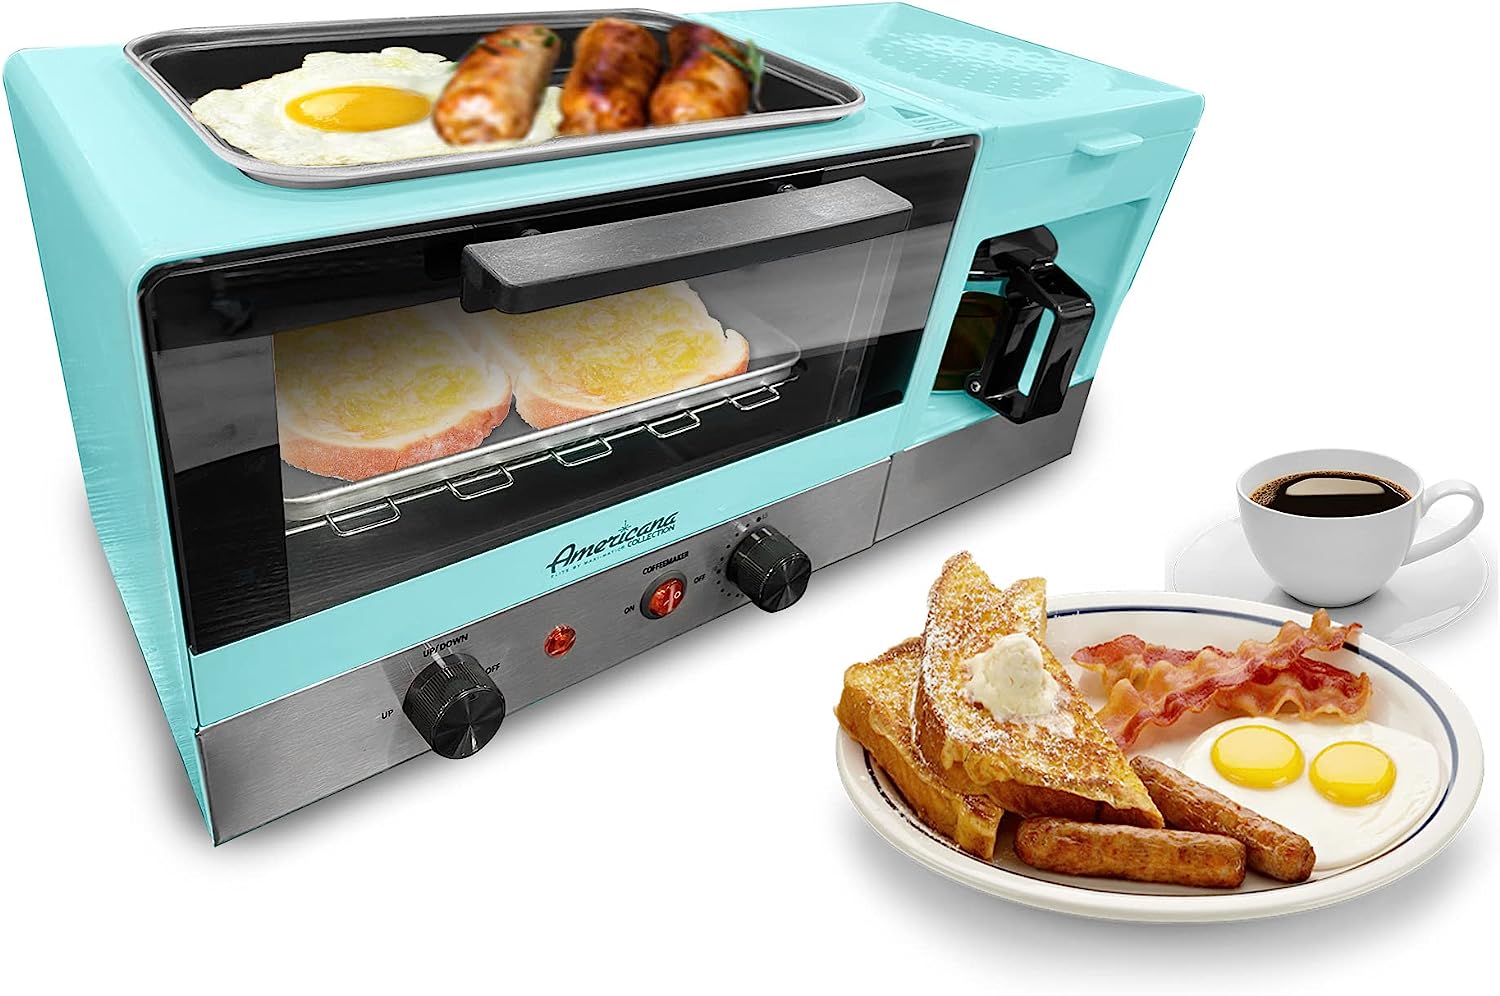 3-in-1 Breakfast Station - Toaster, Coffee Pot, and Griddle